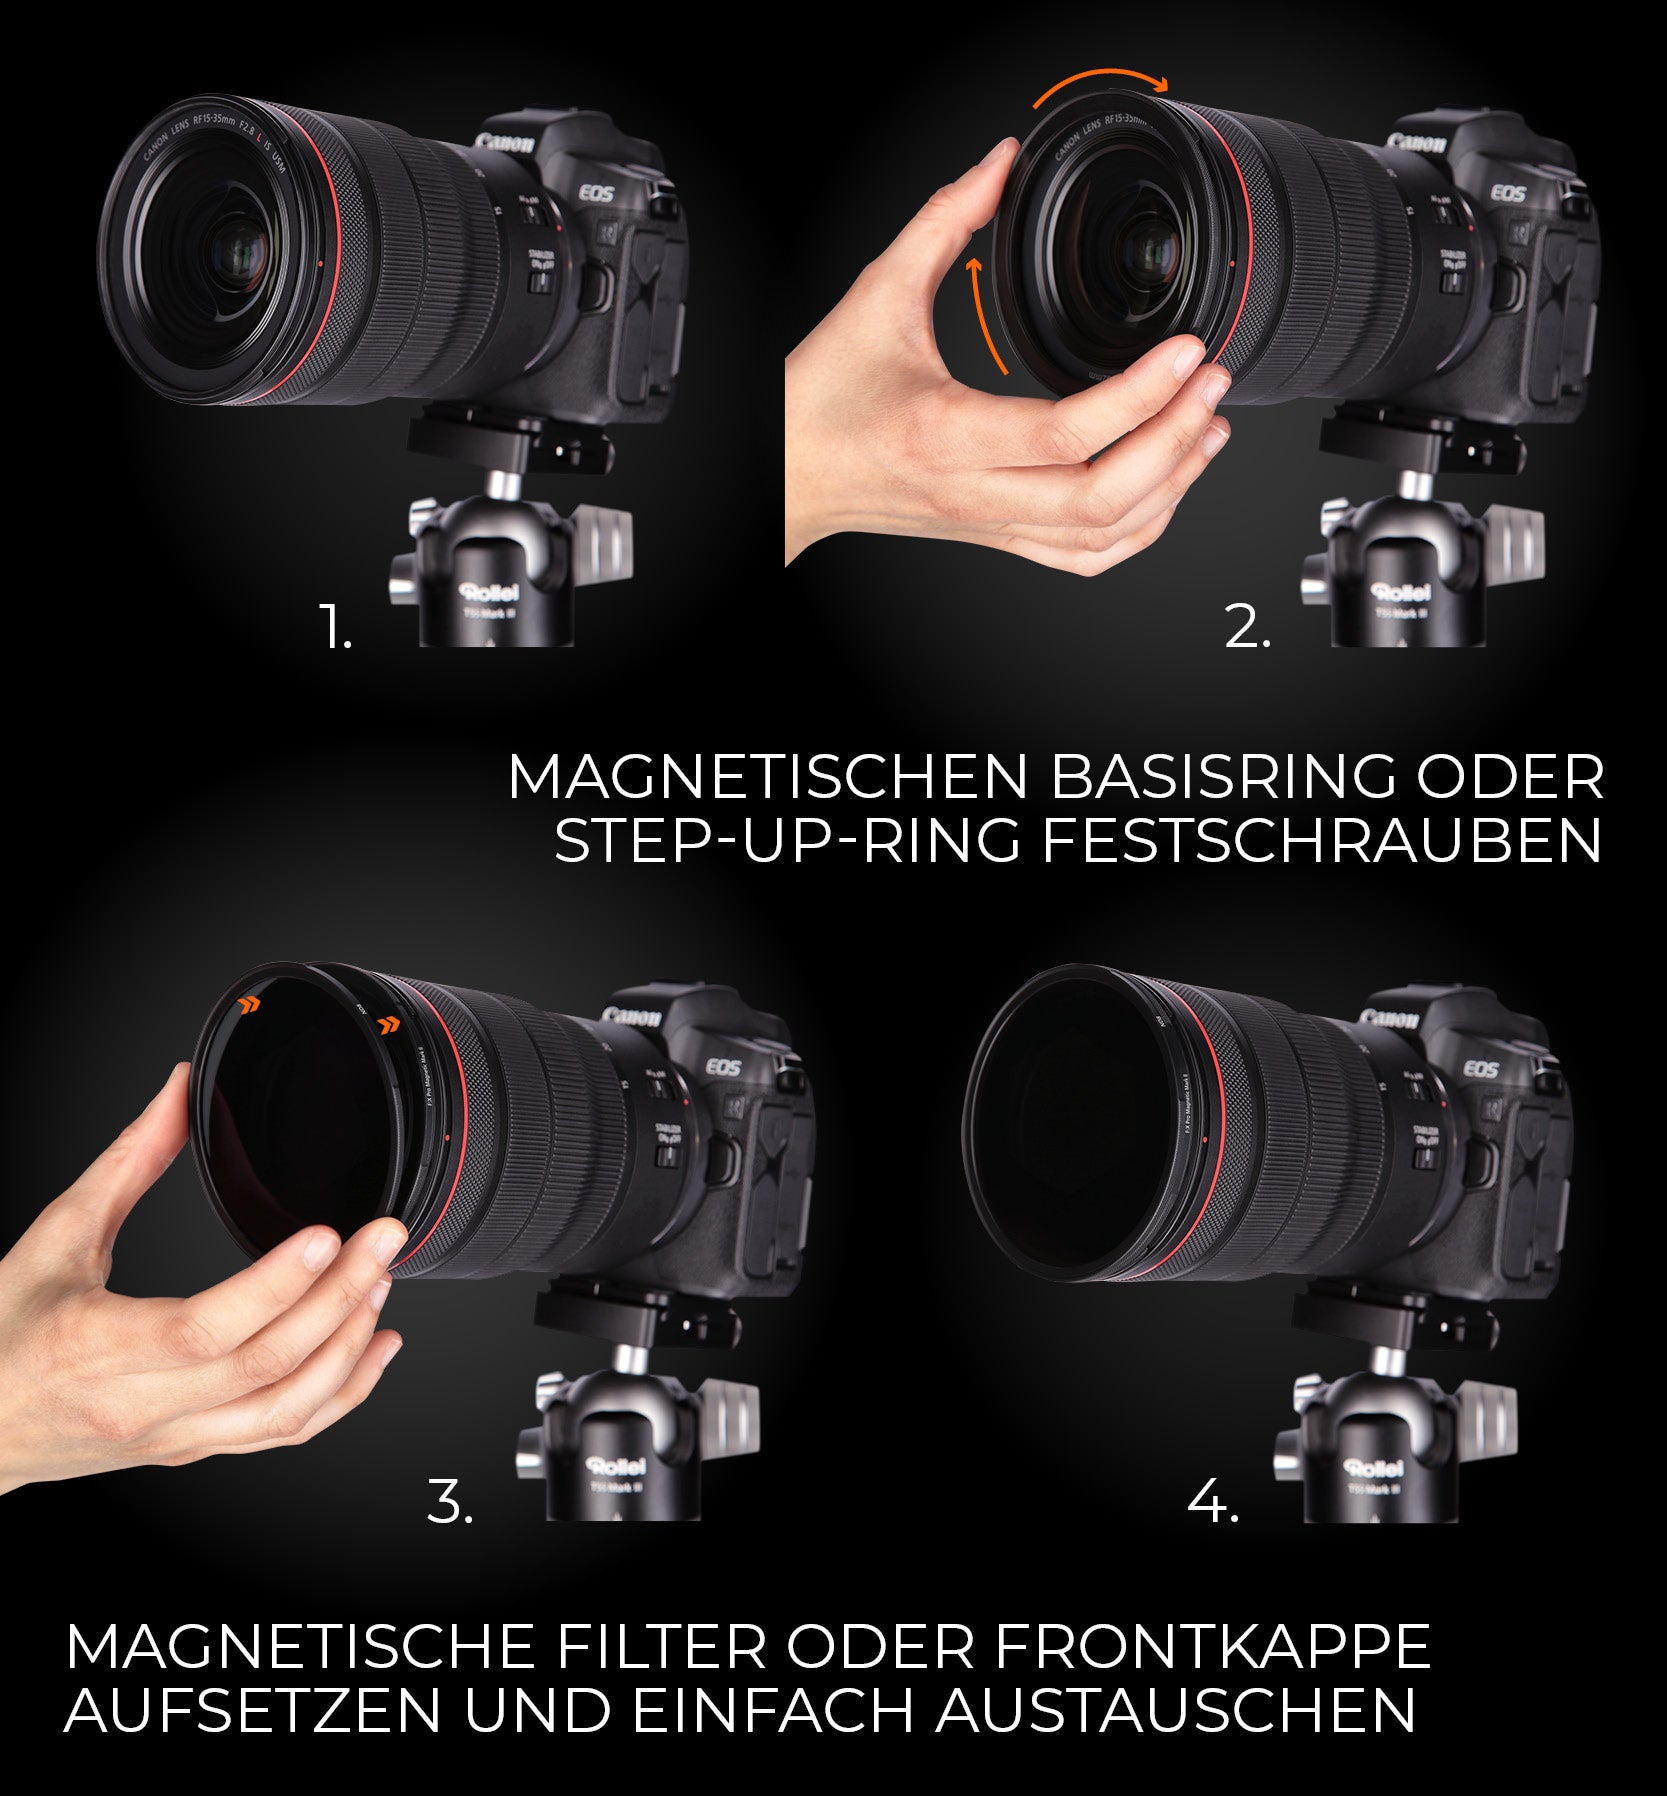 How to use the magnetic round filter on the lens: